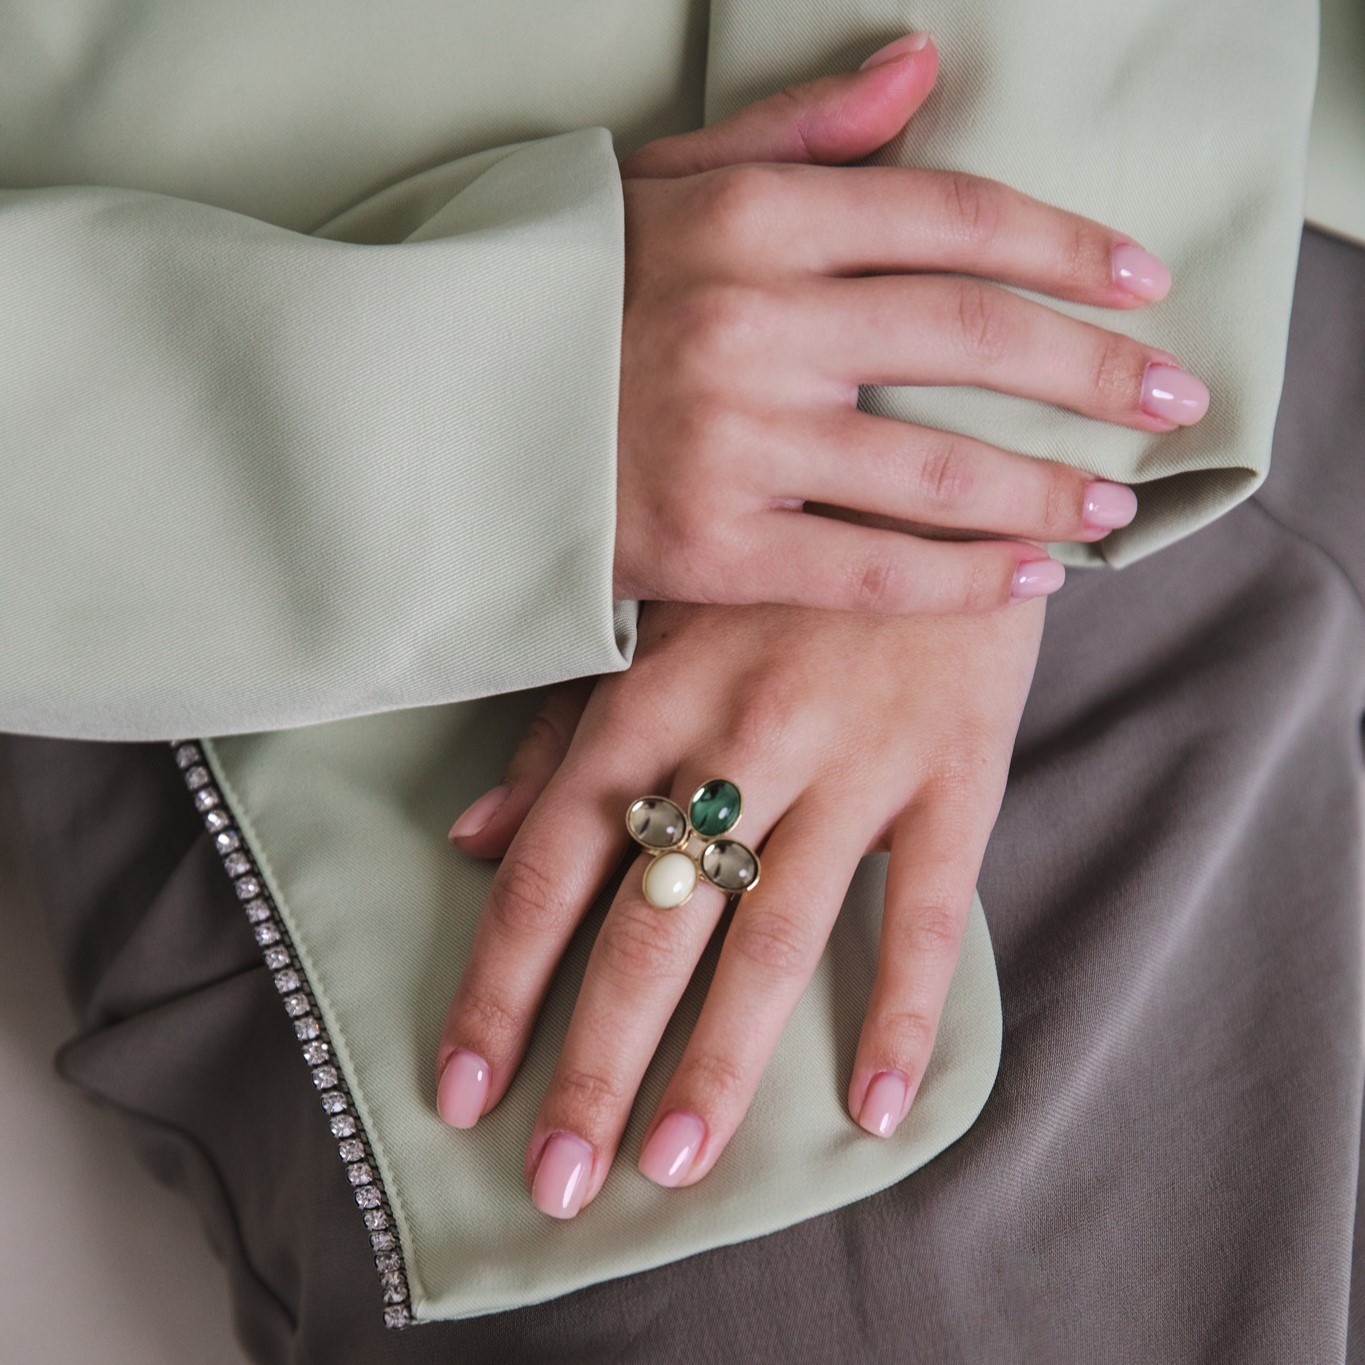 Loulou groene mix ring